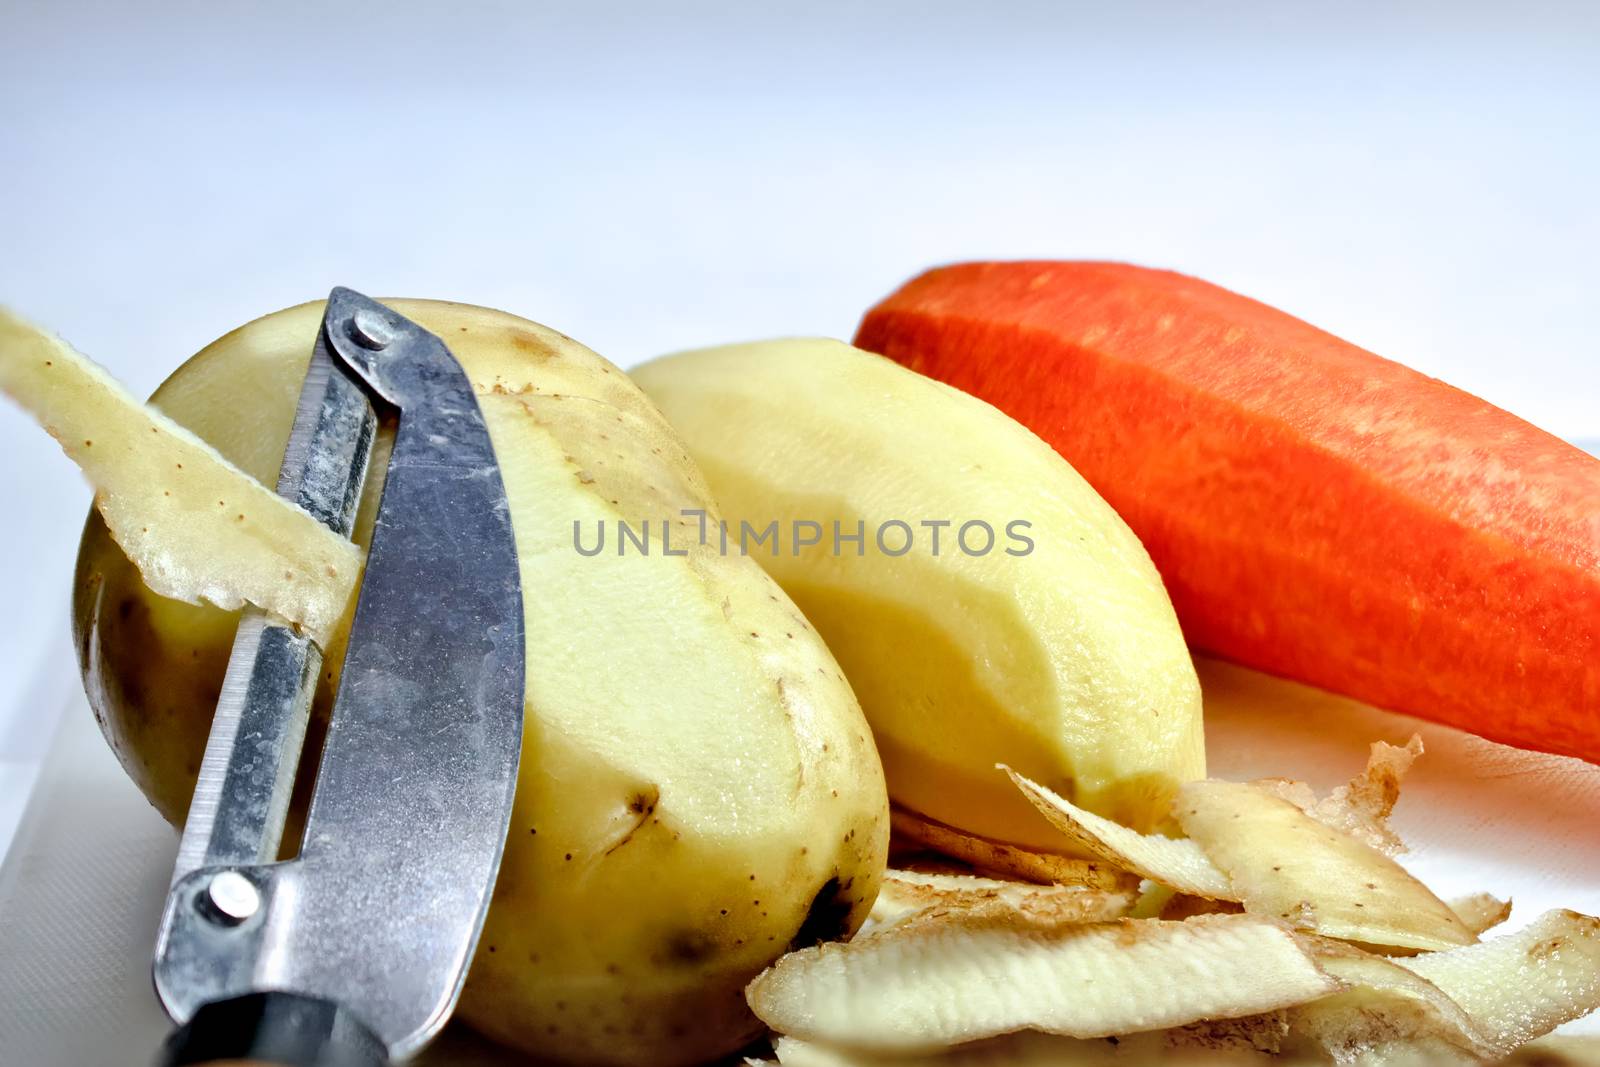 Peeled Potatoes and a Carrot during Preparation